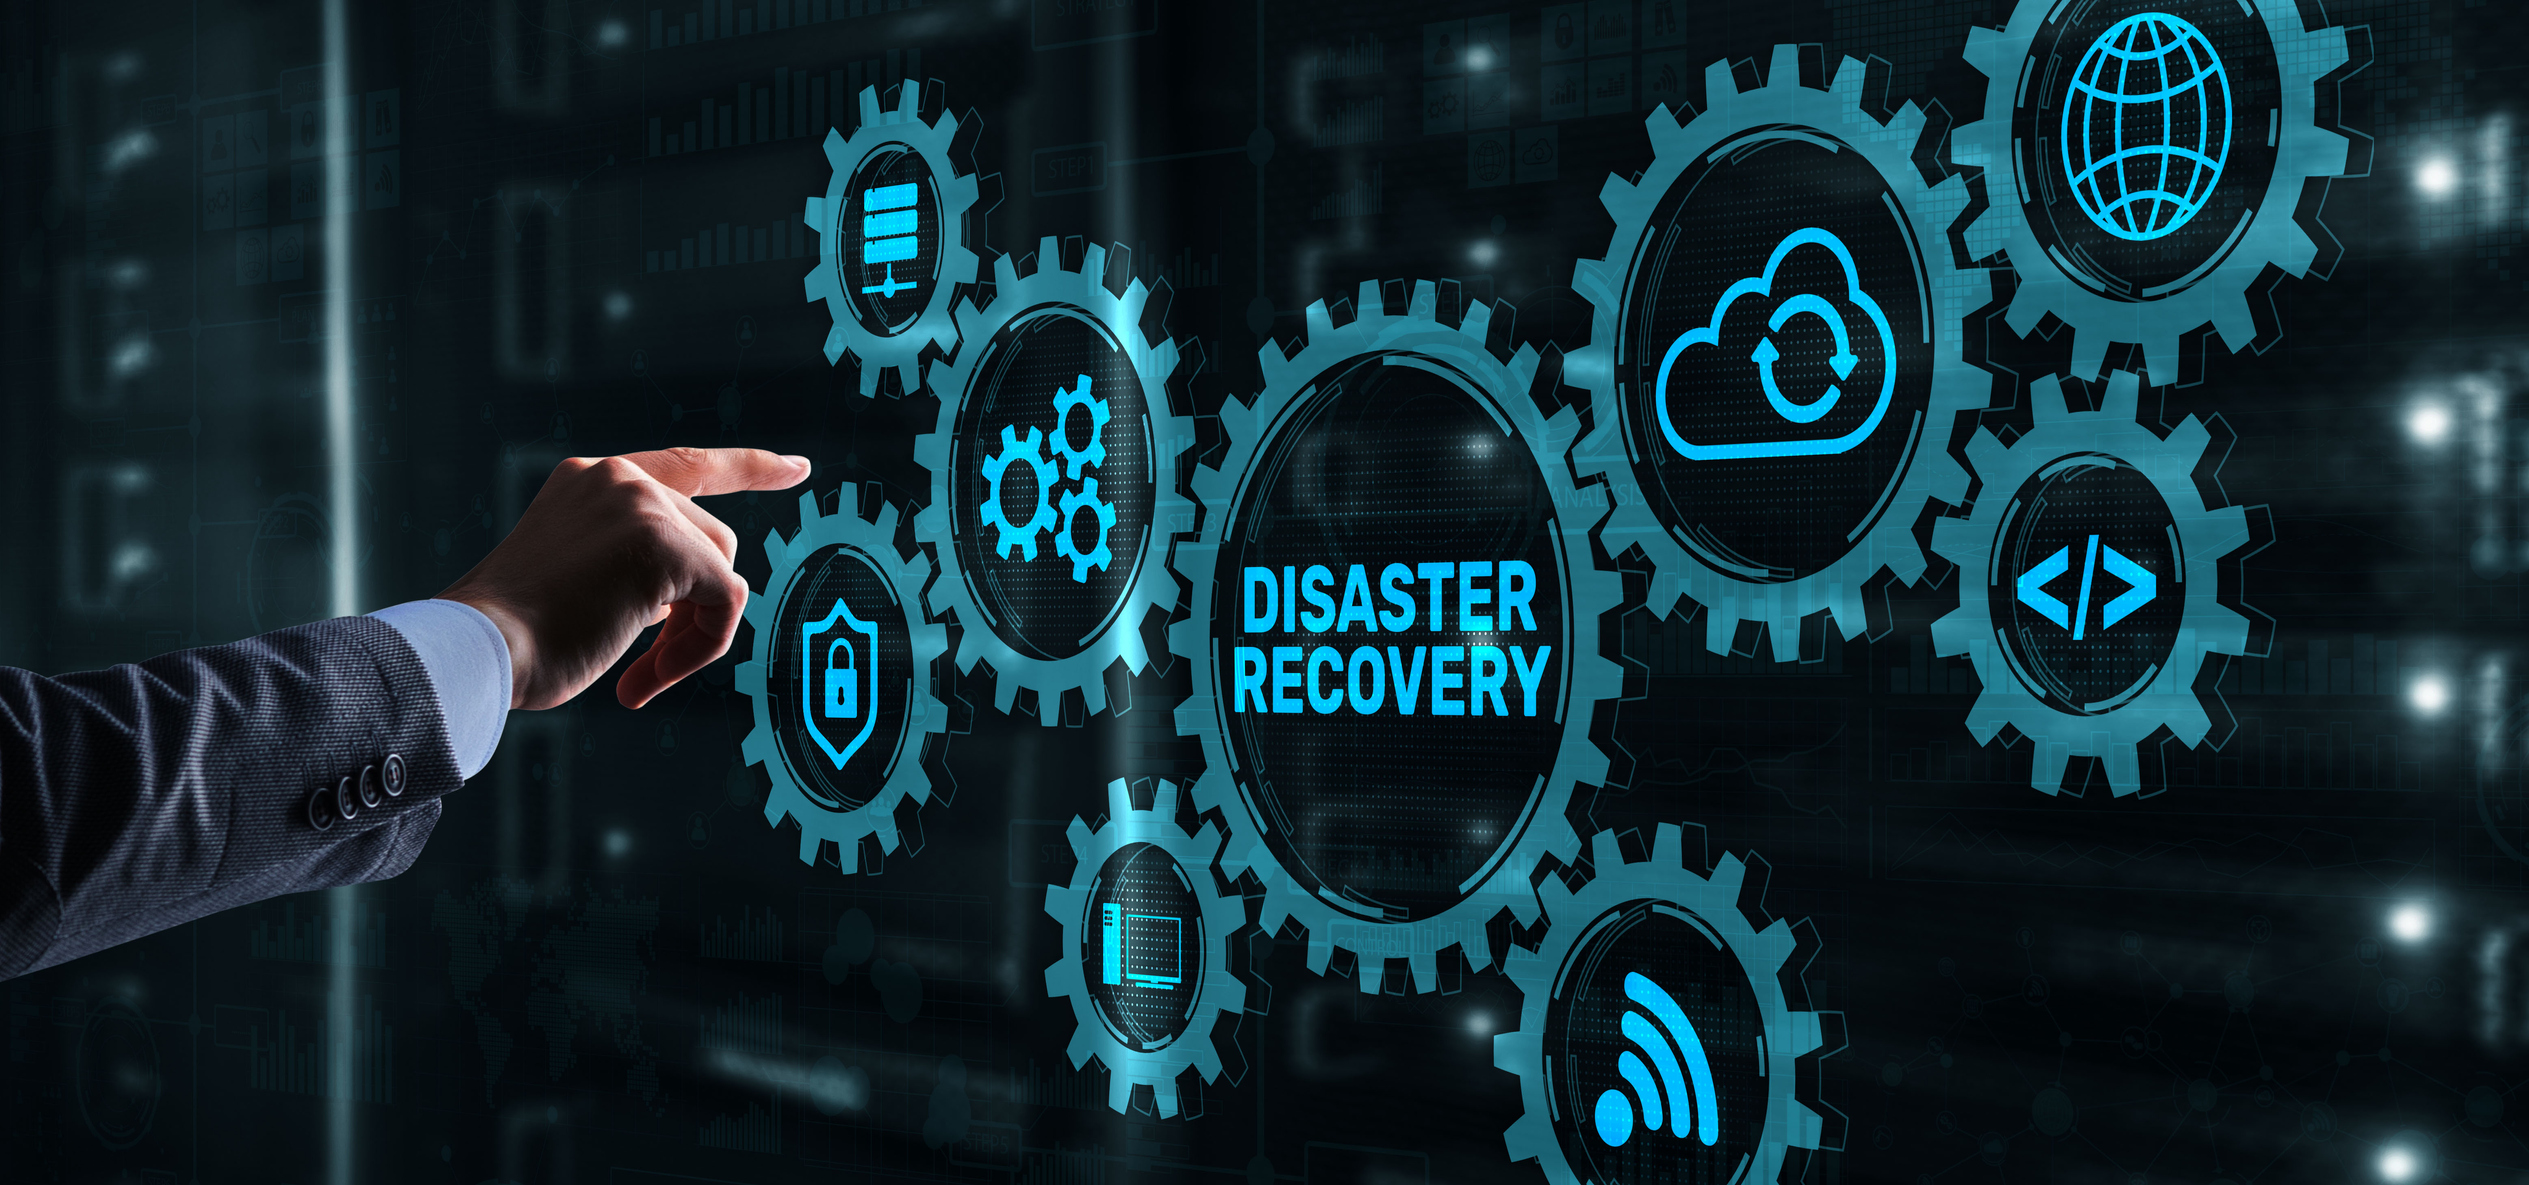 Business continuity and disaster recovery port huron